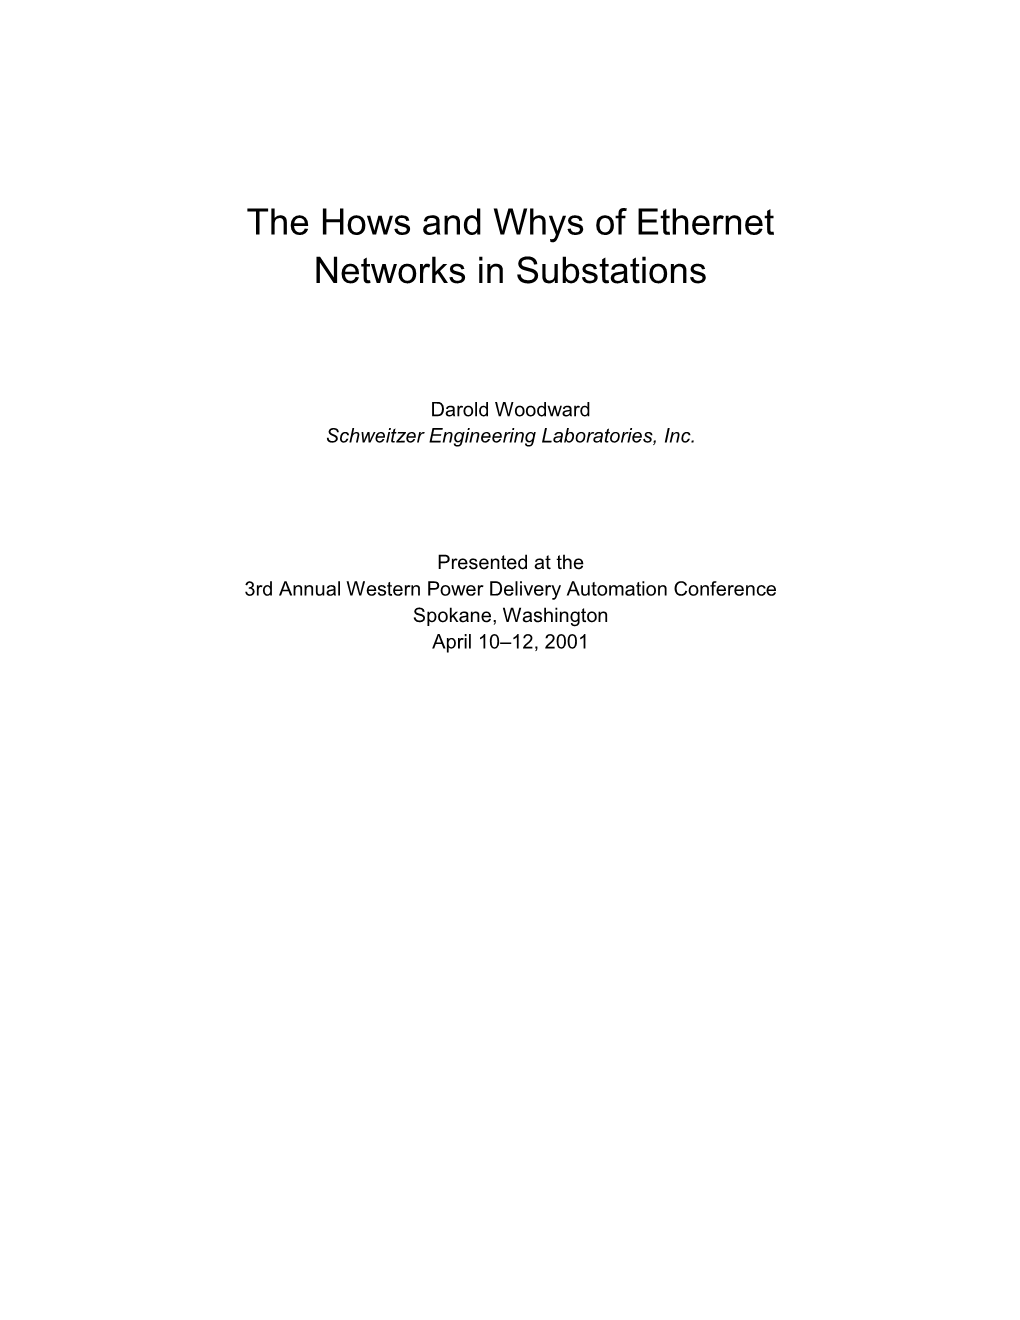 The Hows and Whys of Ethernet Networks in Substations